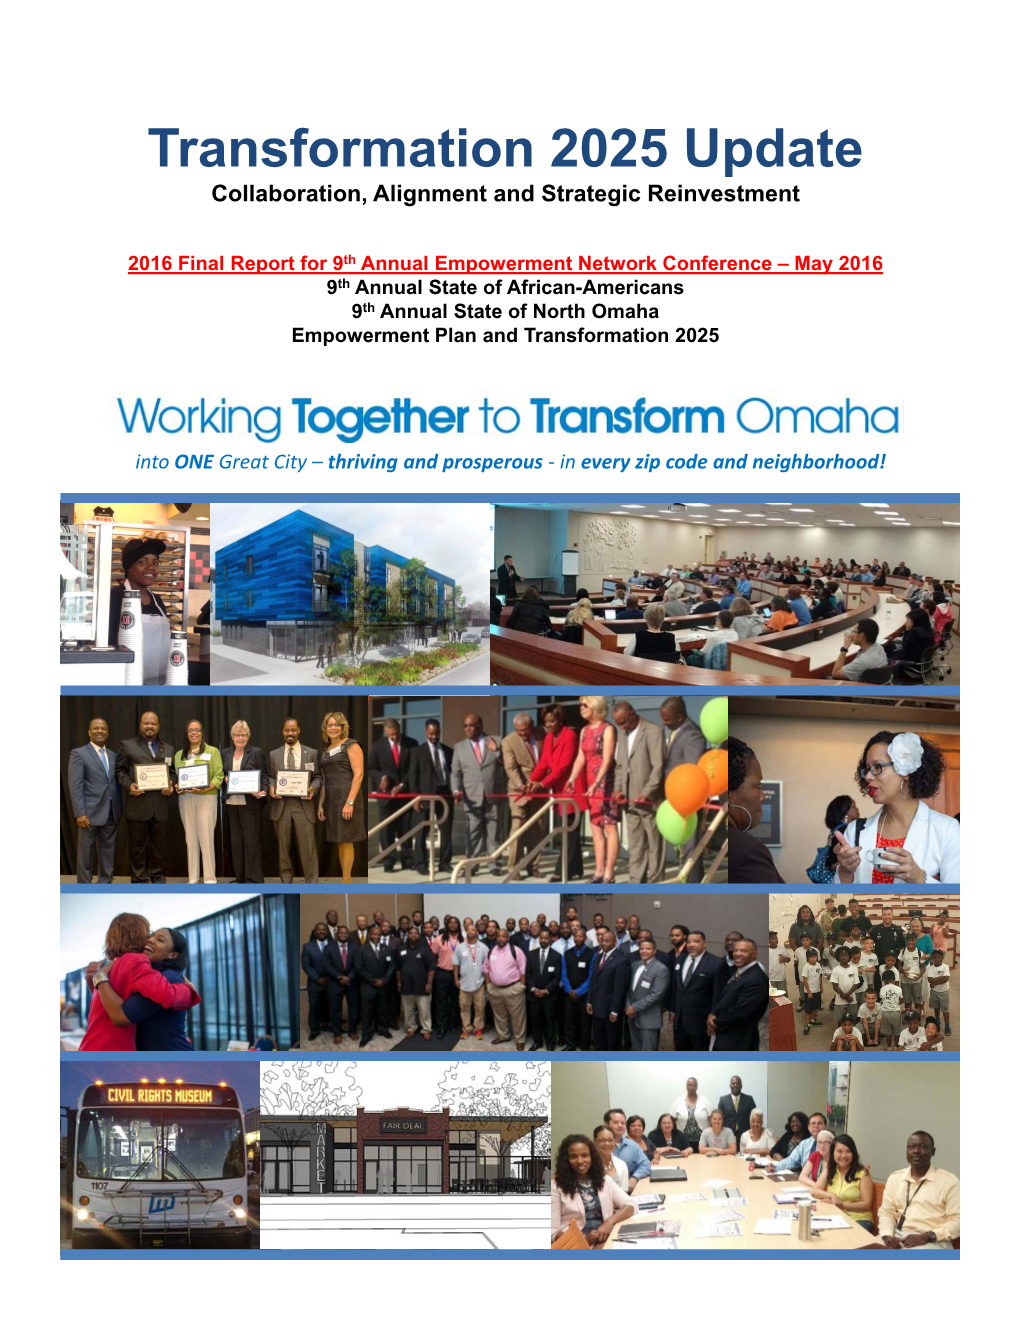 Transformation 2025 Update Collaboration, Alignment and Strategic Reinvestment